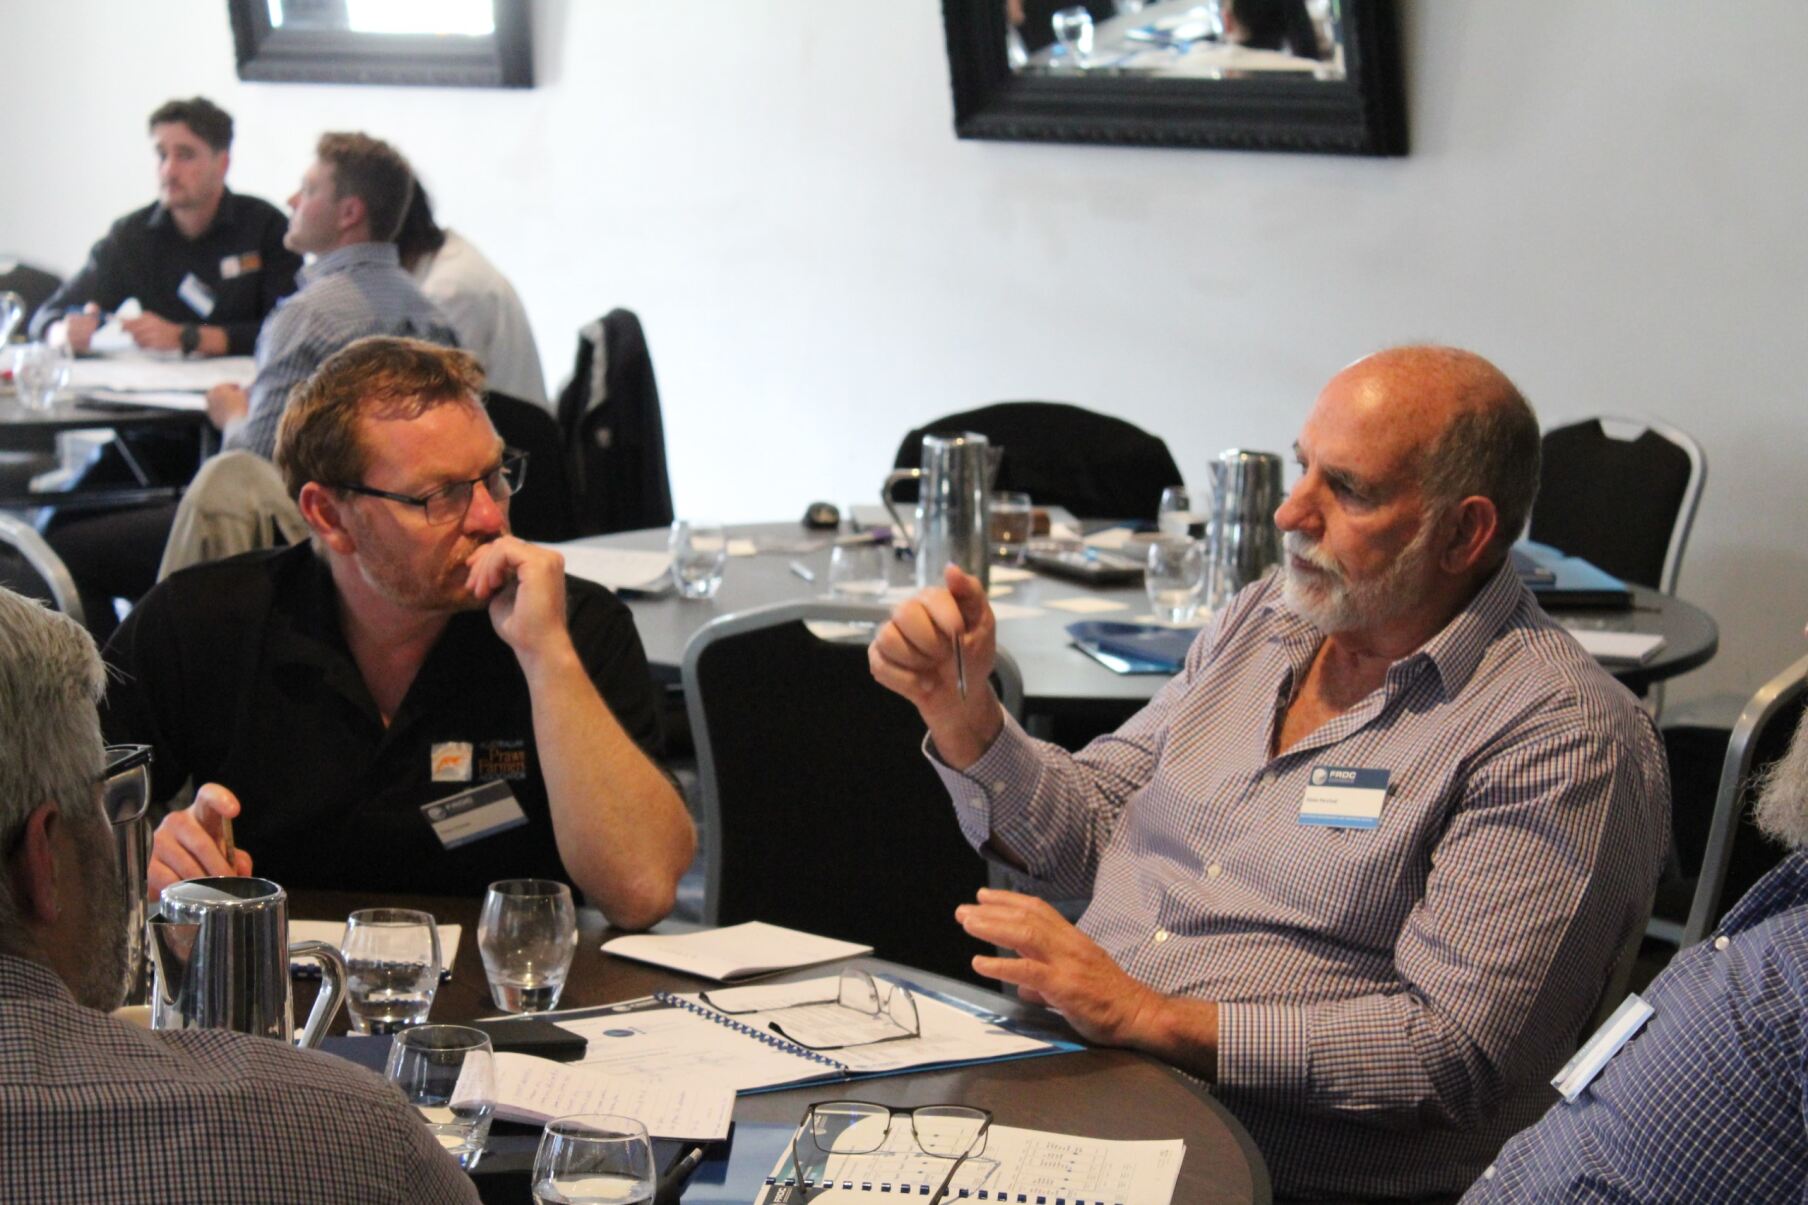 Each group had representatives from different organisations and sectors of fishing and aquaculture. (Pictured: Tony Charles Hatchery Manager Austrlian Prawn Farmers Association, Steve Percival, Aquaculture Development and Veterinary Services)